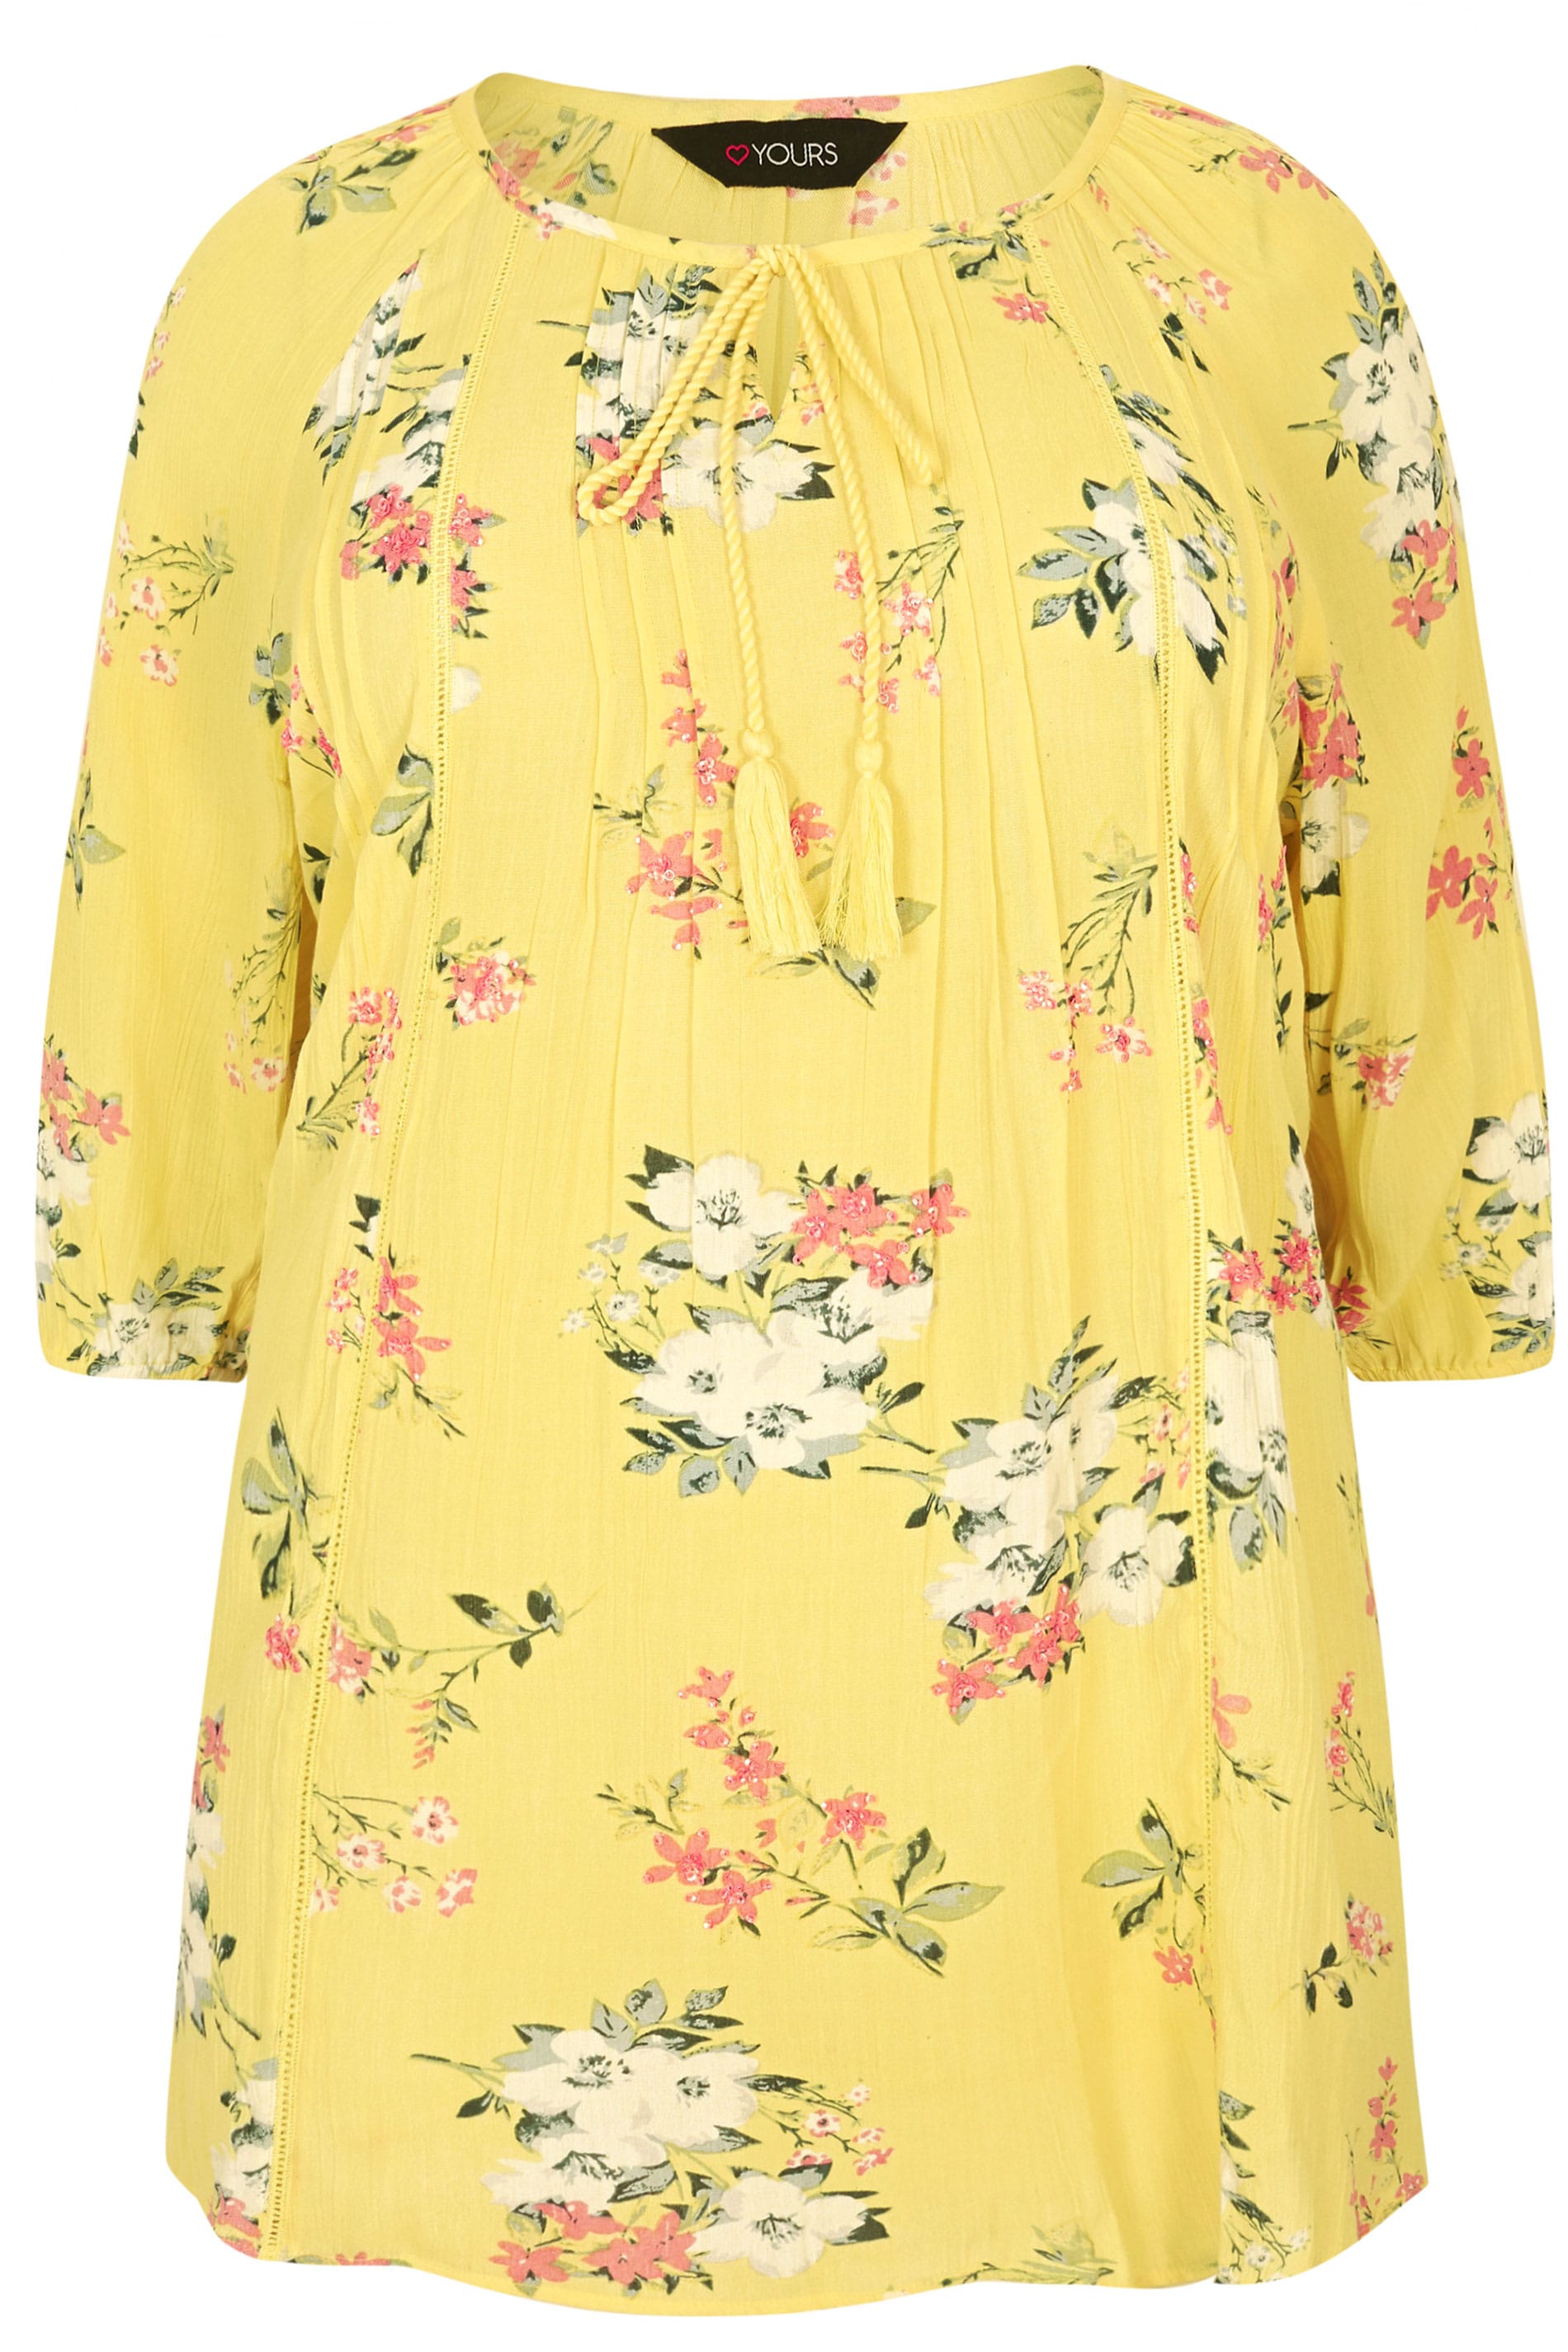 Plus Size Yellow Floral Gypsy Top | Sizes 16 to 36 | Yours Clothing